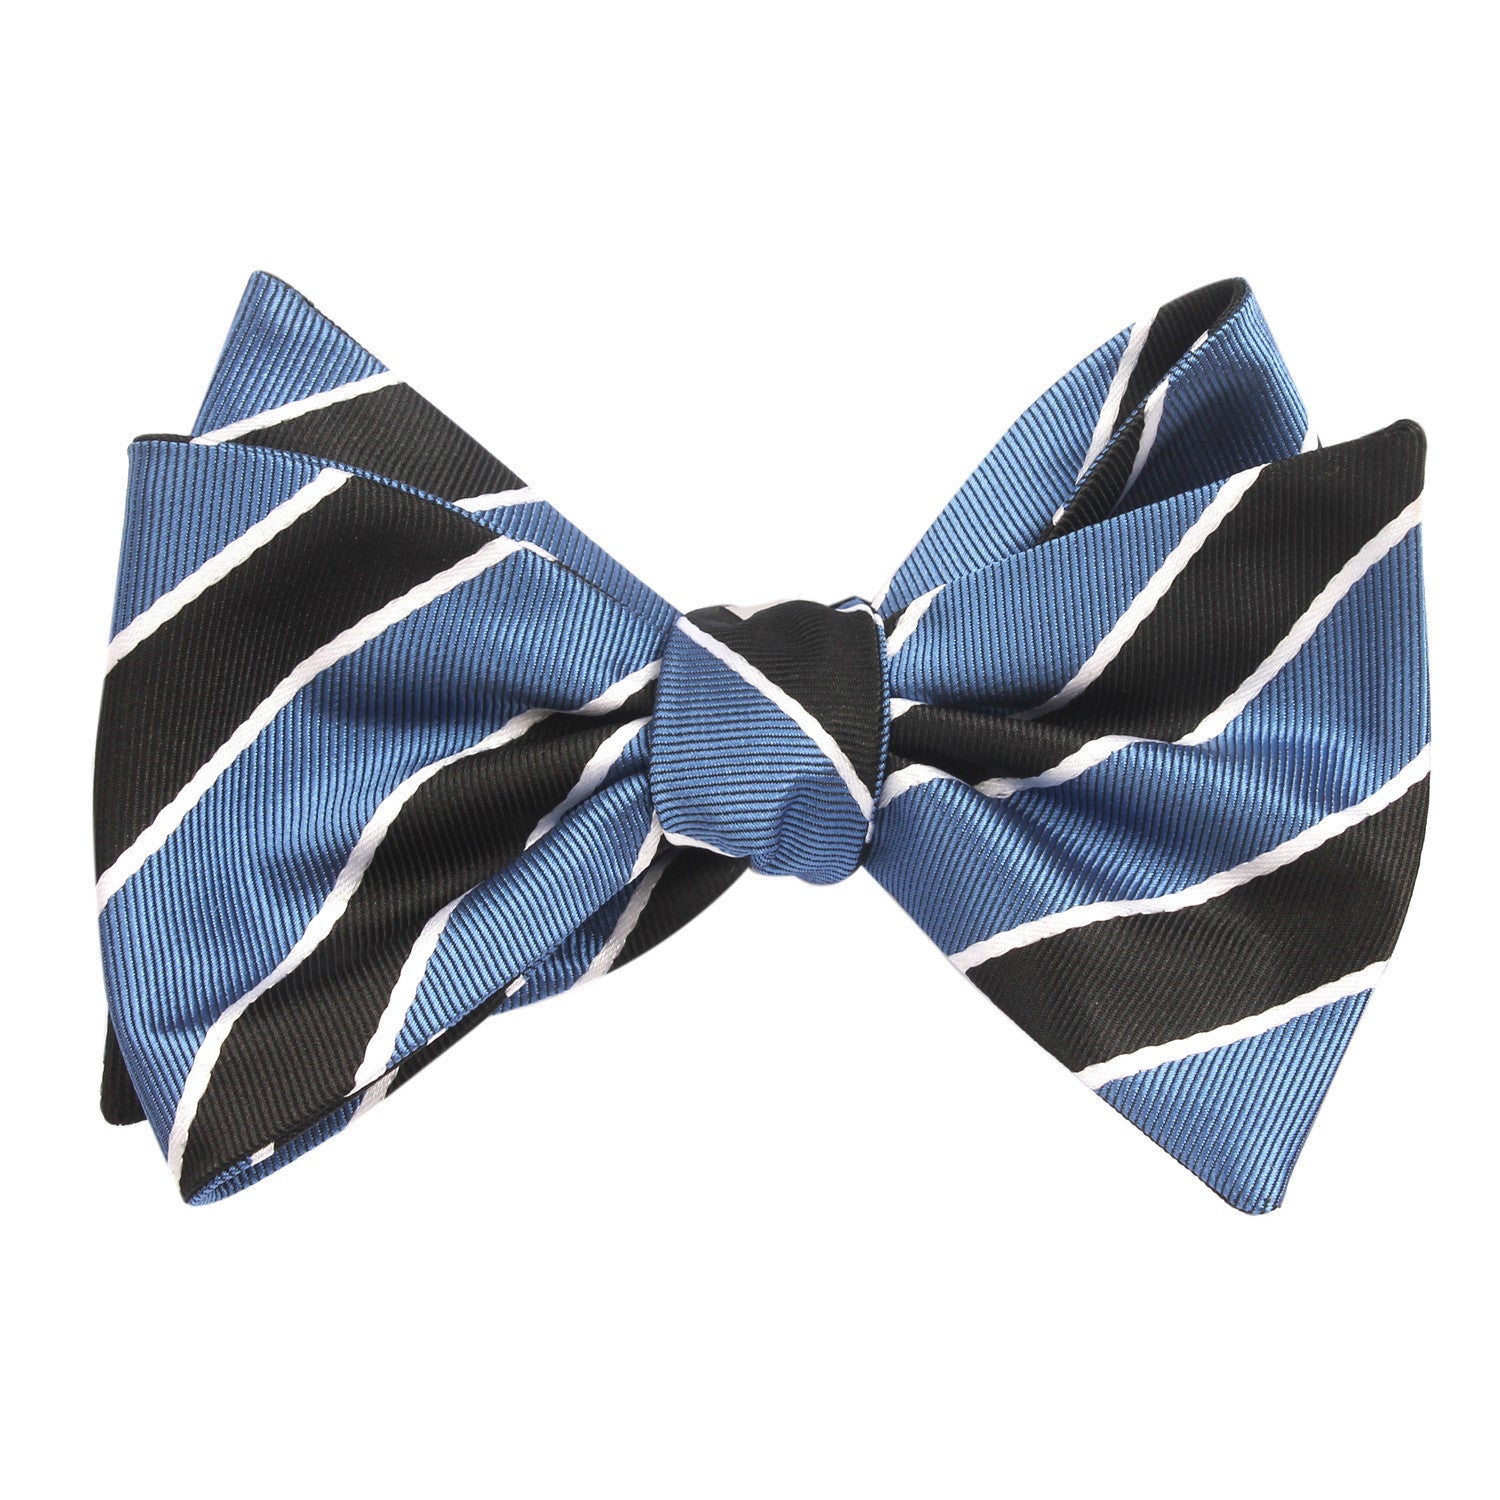 Black White Blue Striped Bow Tie Untied Self tied knot by OTAA